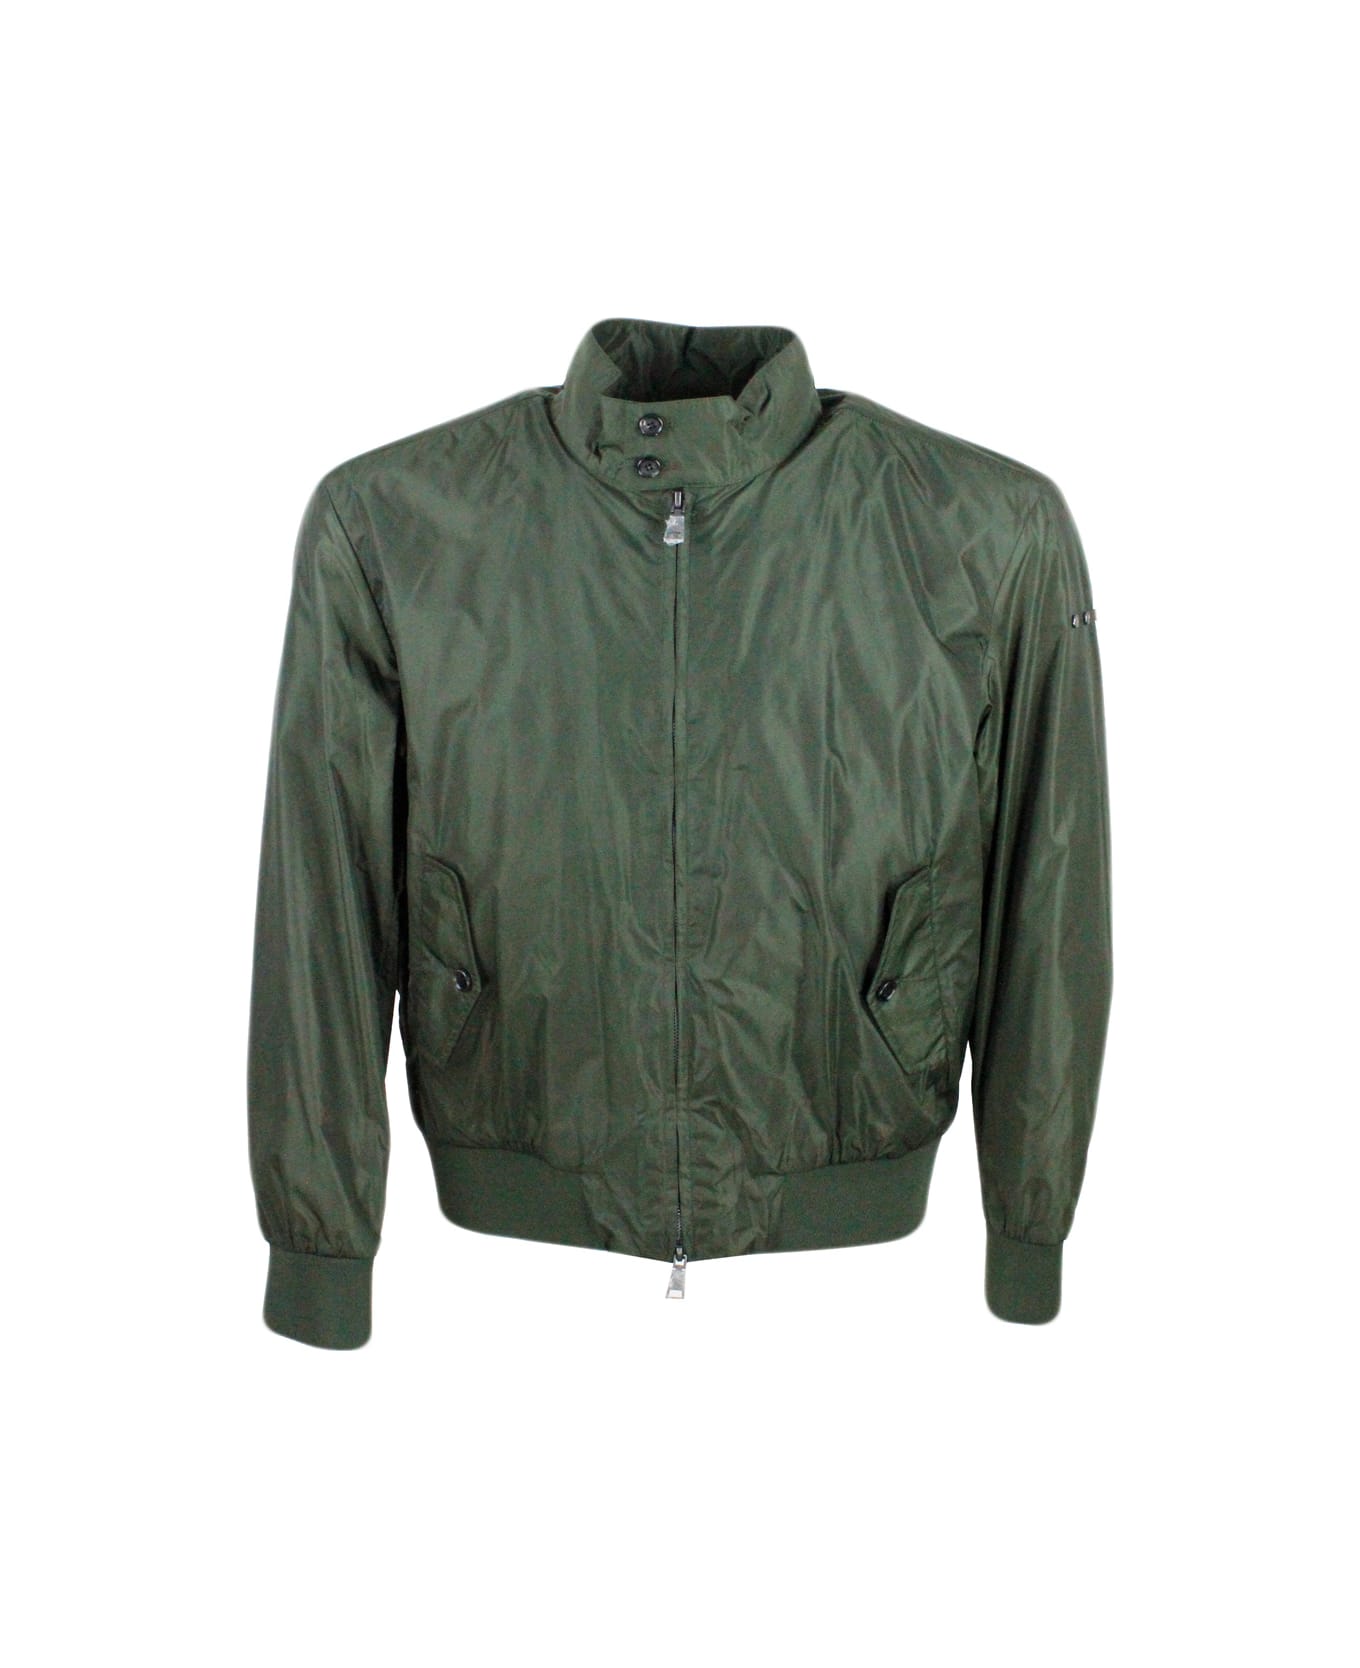 Add Water-repellent Nylon Bomber Jacket, Zip Closure And Pockets With Flap Closure - Green